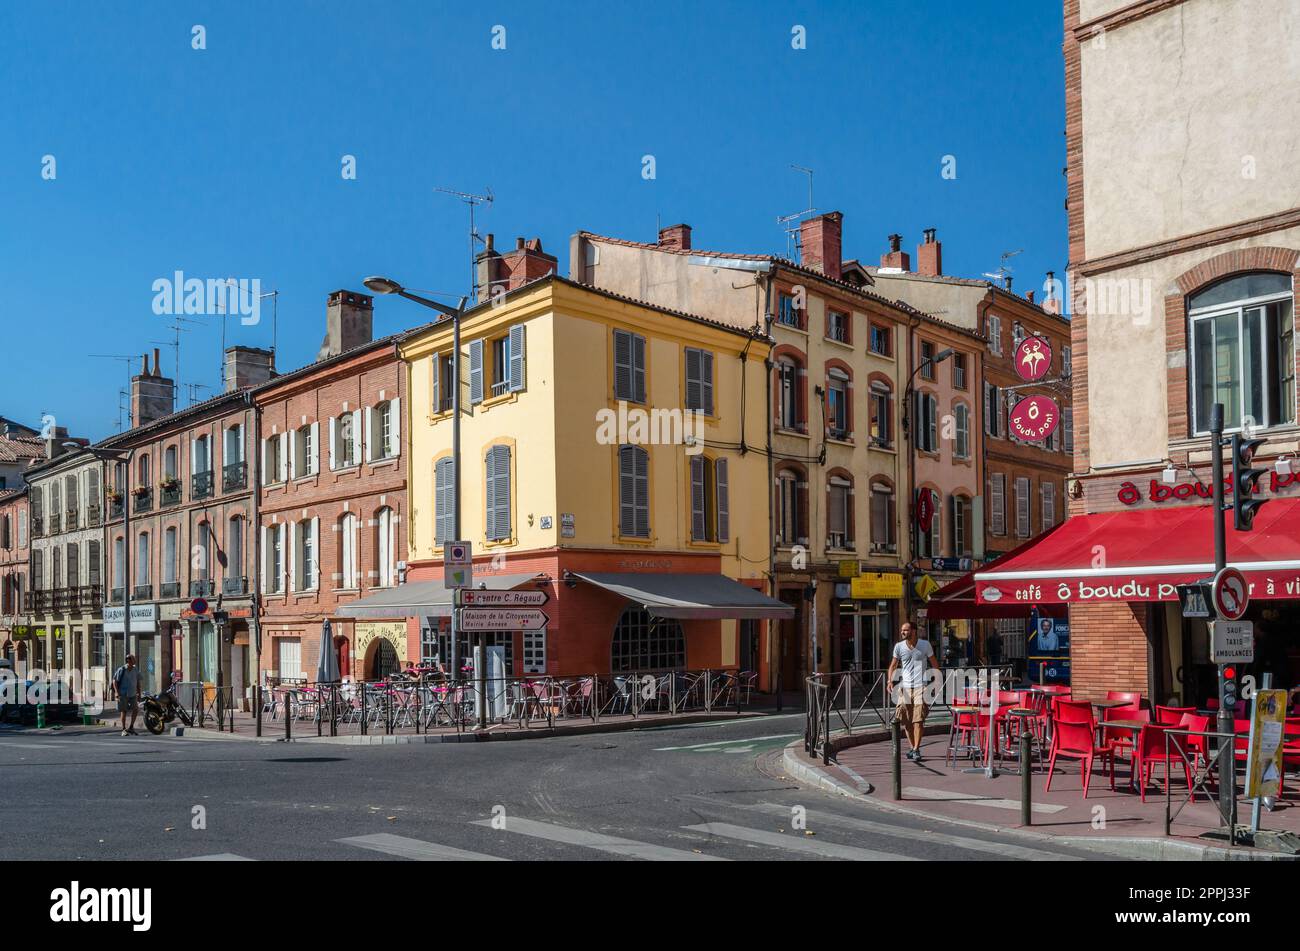 TOULOUSE, FRANCE - SEPTEMBER 5, 2013: Urban scene, view of streets in the old town of Toulouse, Occitanie, southern France Stock Photo